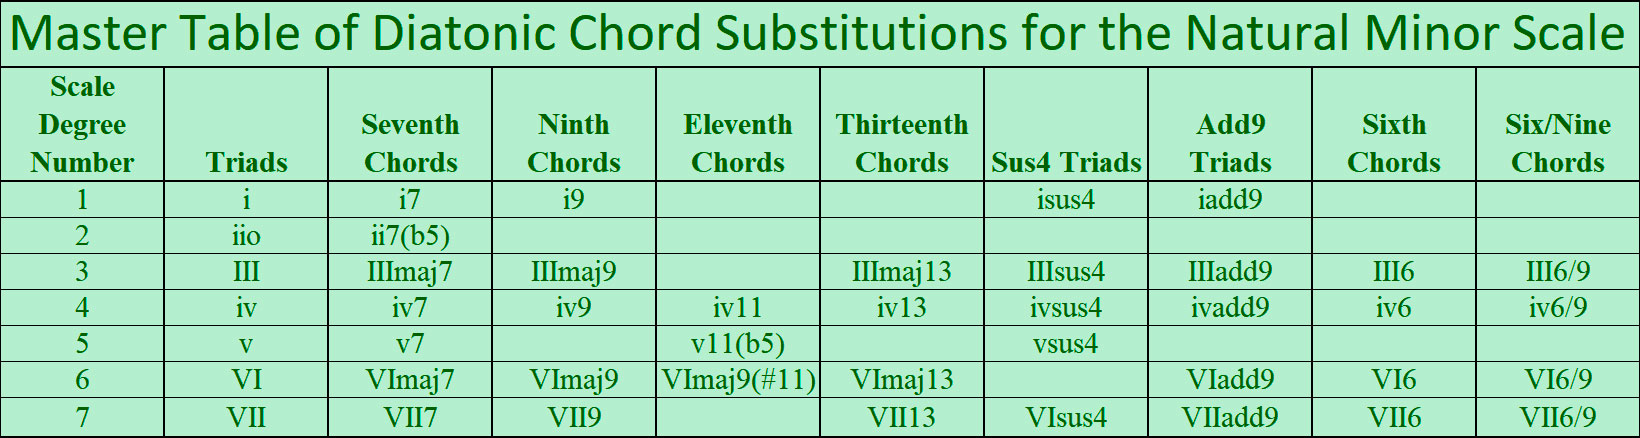 Master Diatonic Chord Substitution Chart for A Natural Minor